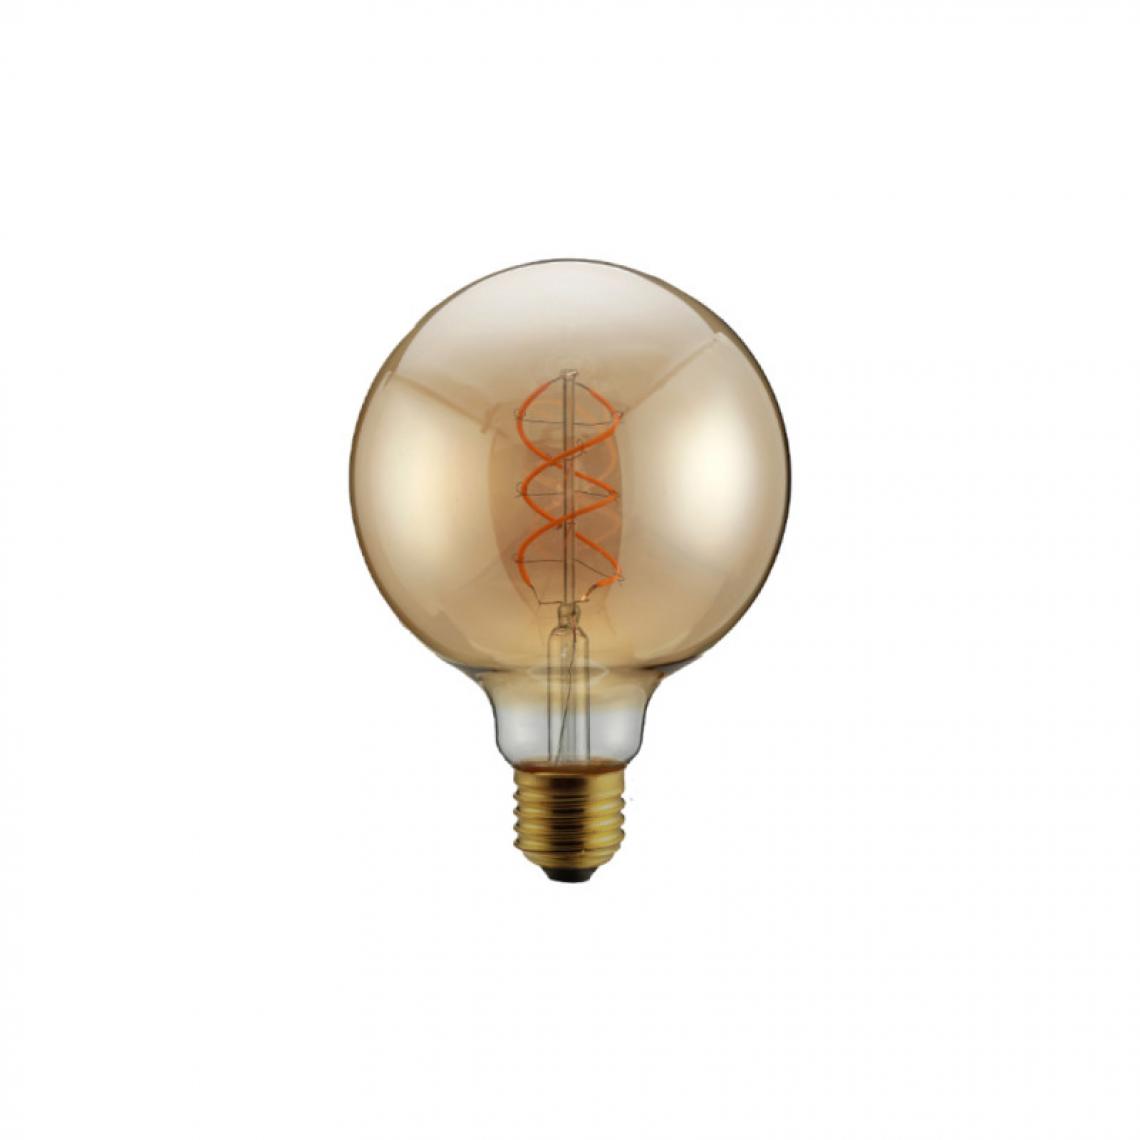 Xxcell - Ampoule LED globe XXCELL - 5 W - 380 lumens - 2100 K - E27 - Ampoules LED